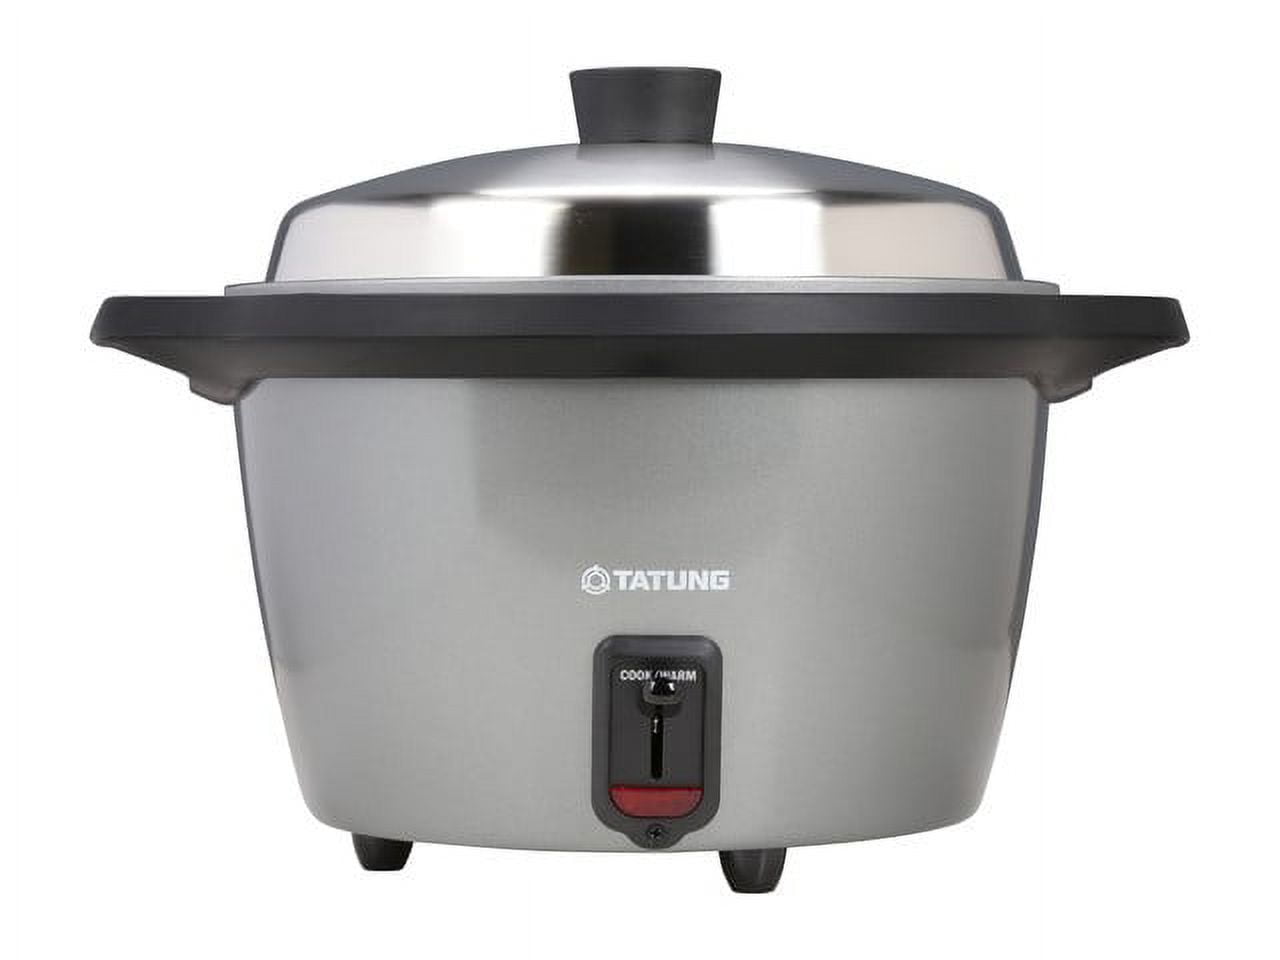 Tatung 3-Cup Multifunction Indirect Heat Rice Cooker Steamer and Warmer